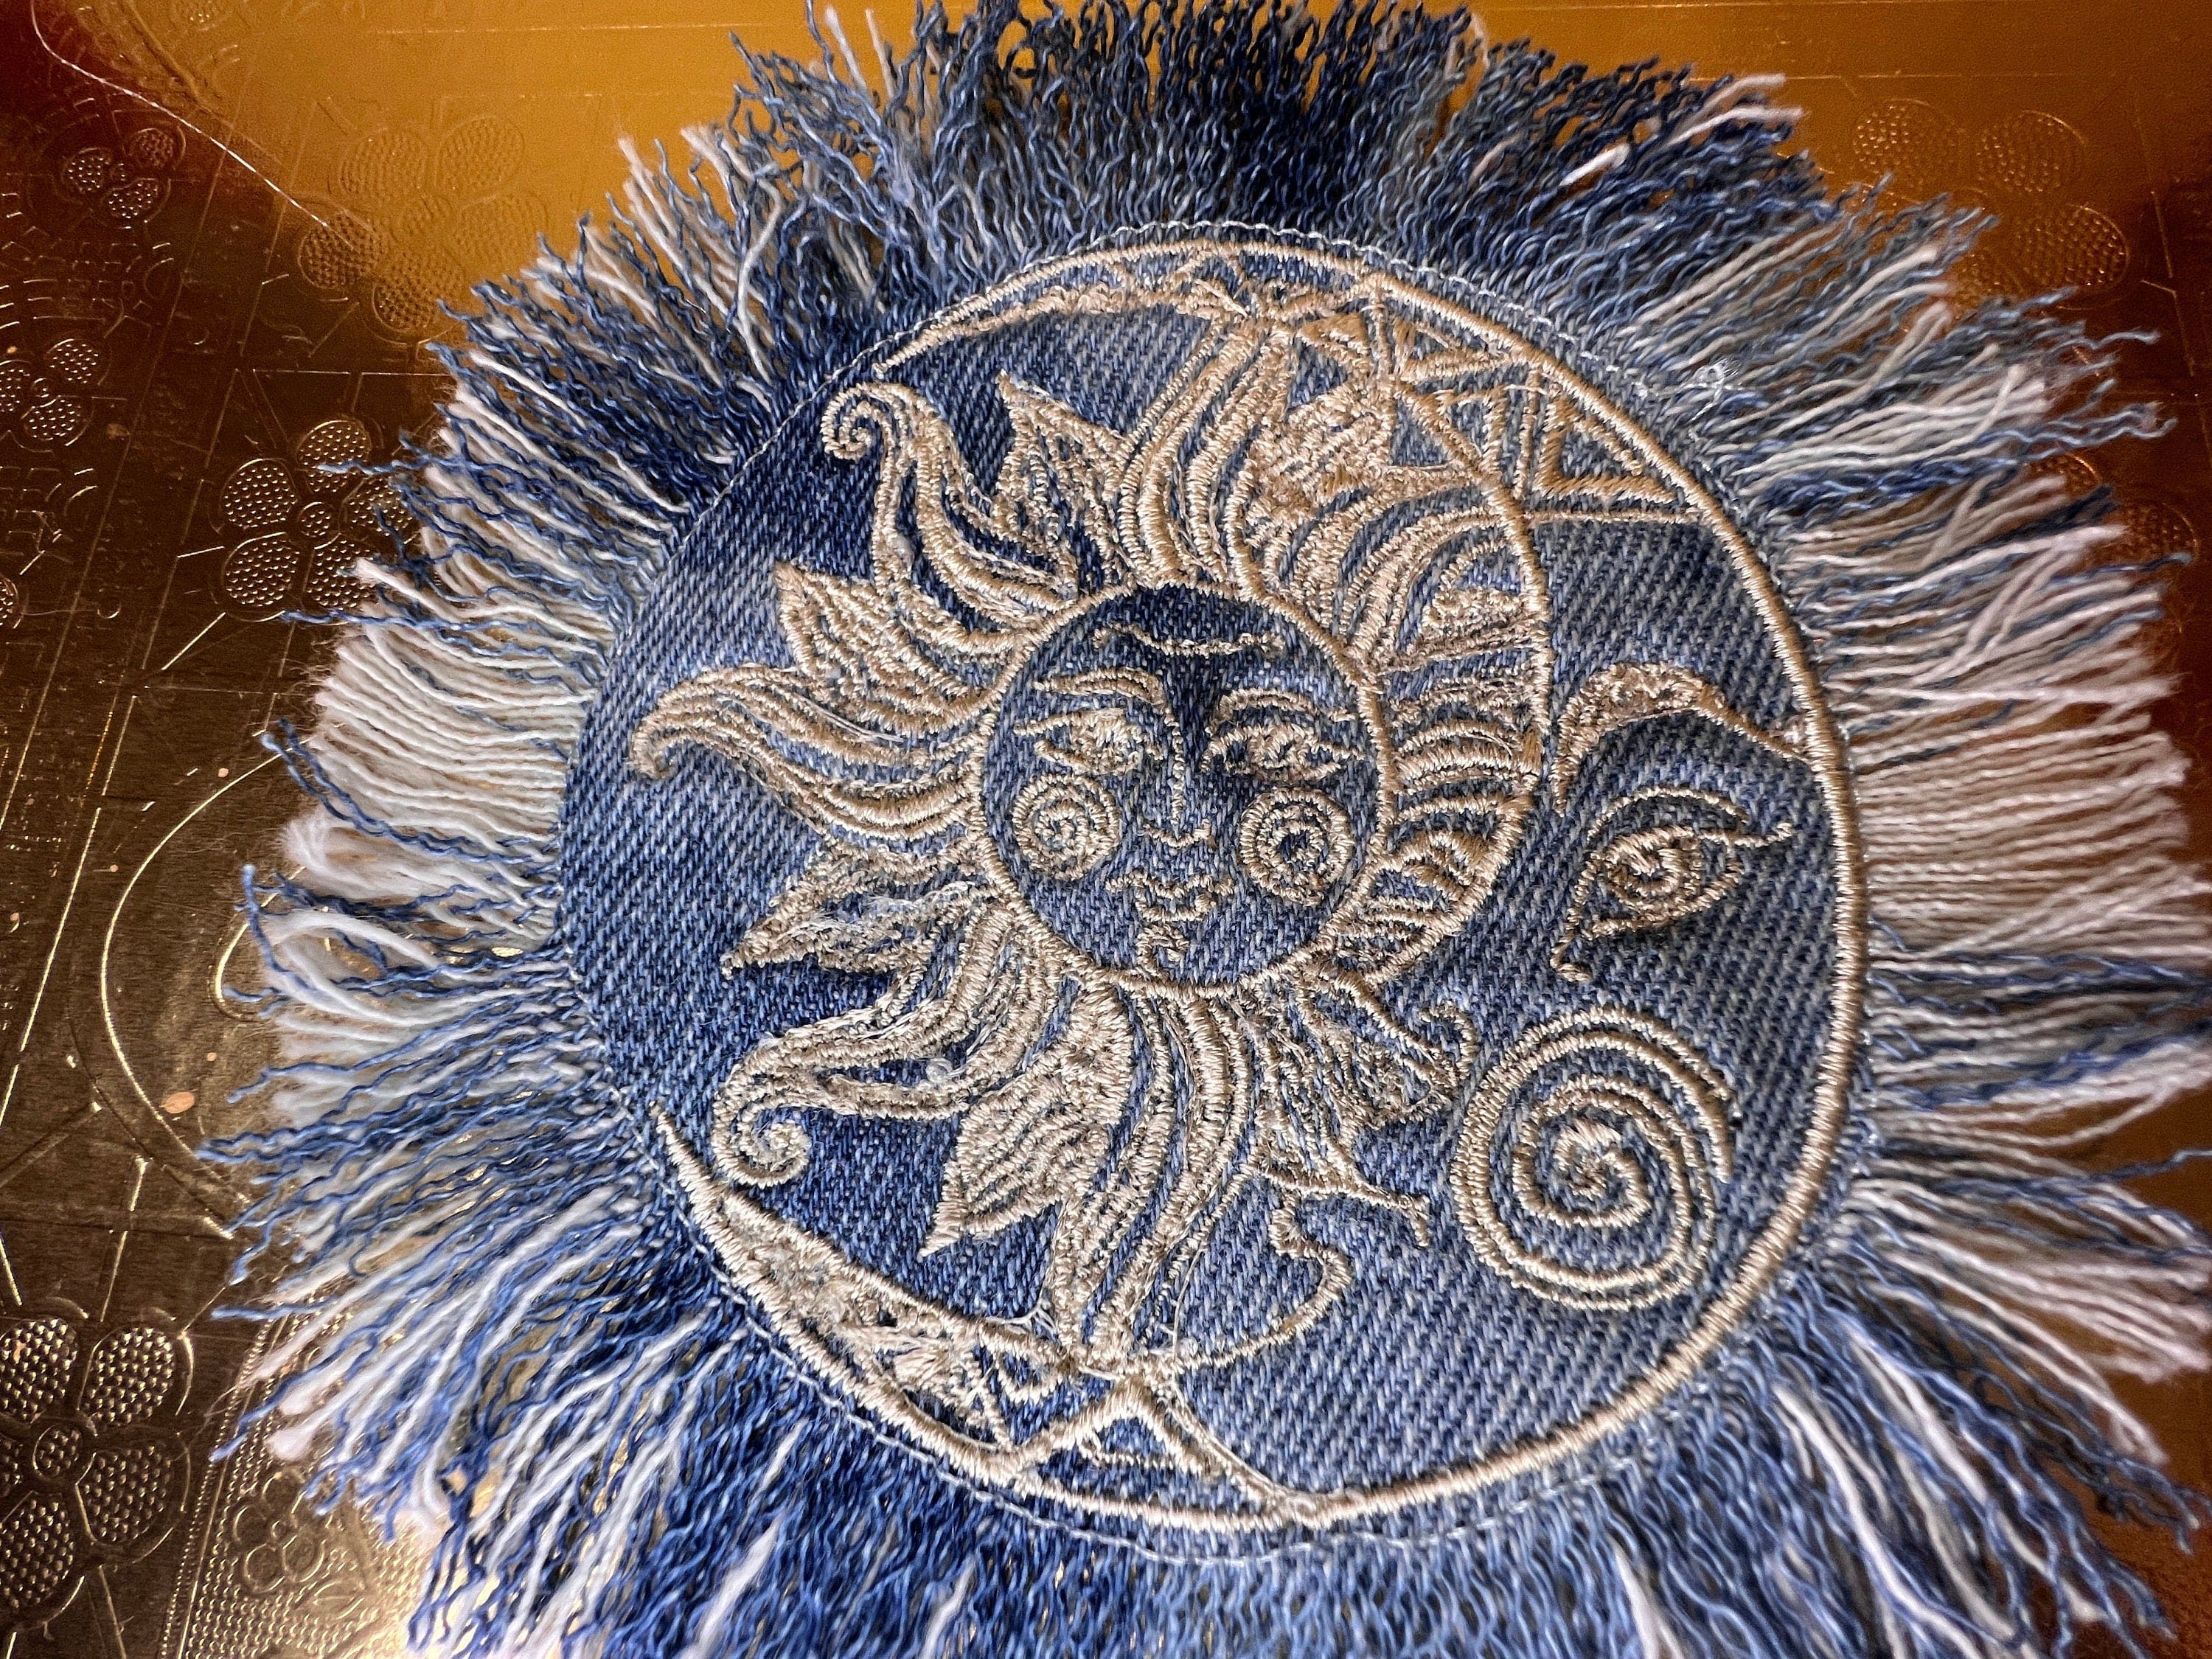 Sun & Moon Bleached Blue Denim FRINGED Patch art Indigo Denim CELESTIAL 5" Round IRON On Jean Patches embroidered Sol decal patchwork frayed Appliques & Patches